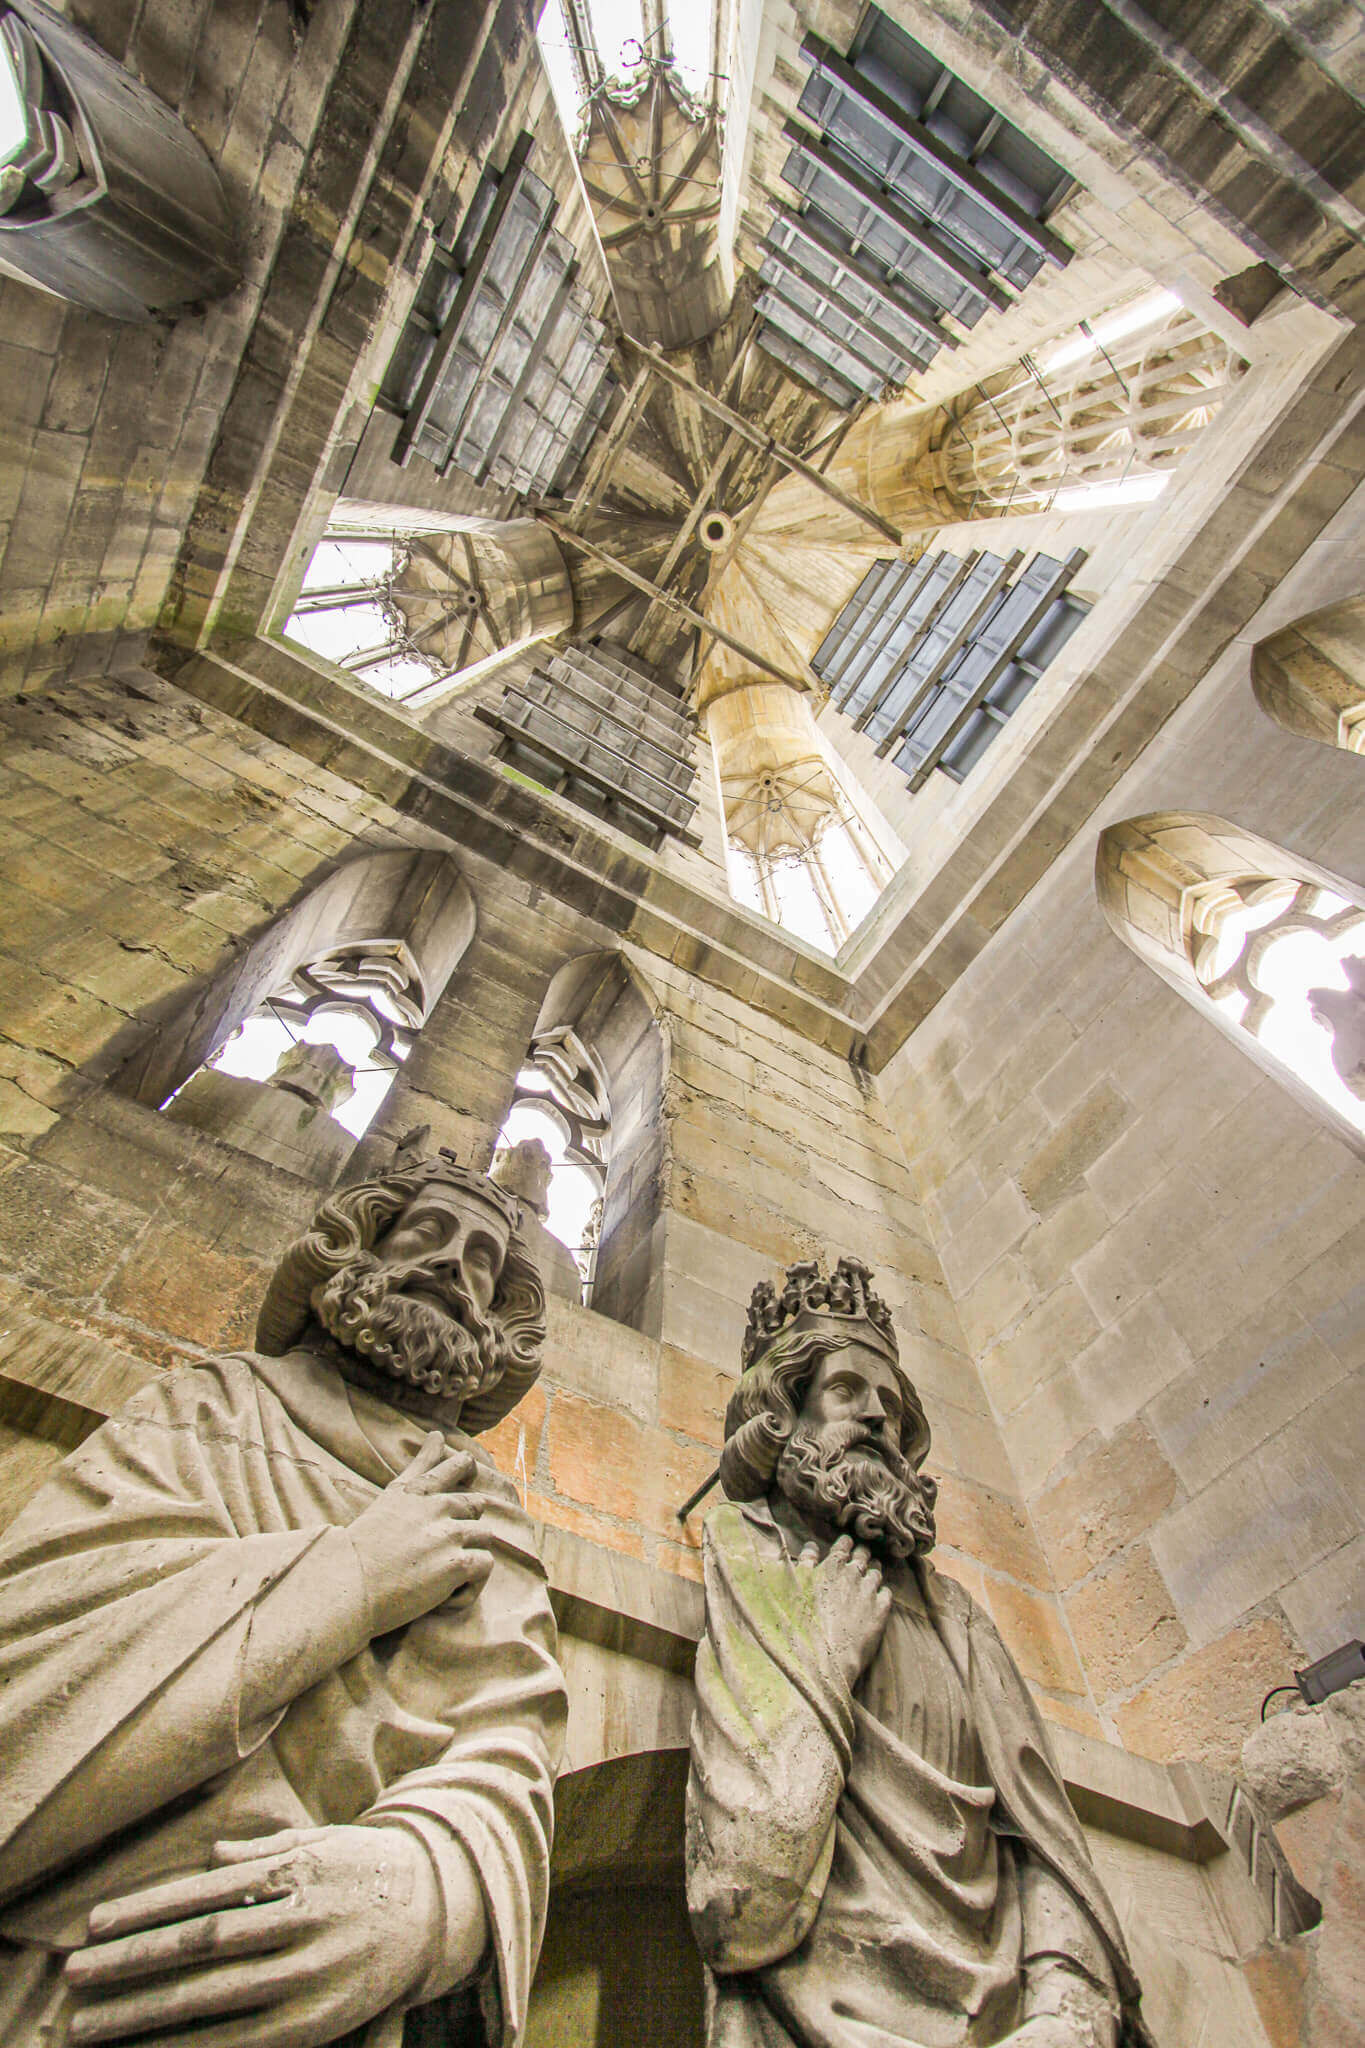 Inside the belltower of the Reims Cathedral